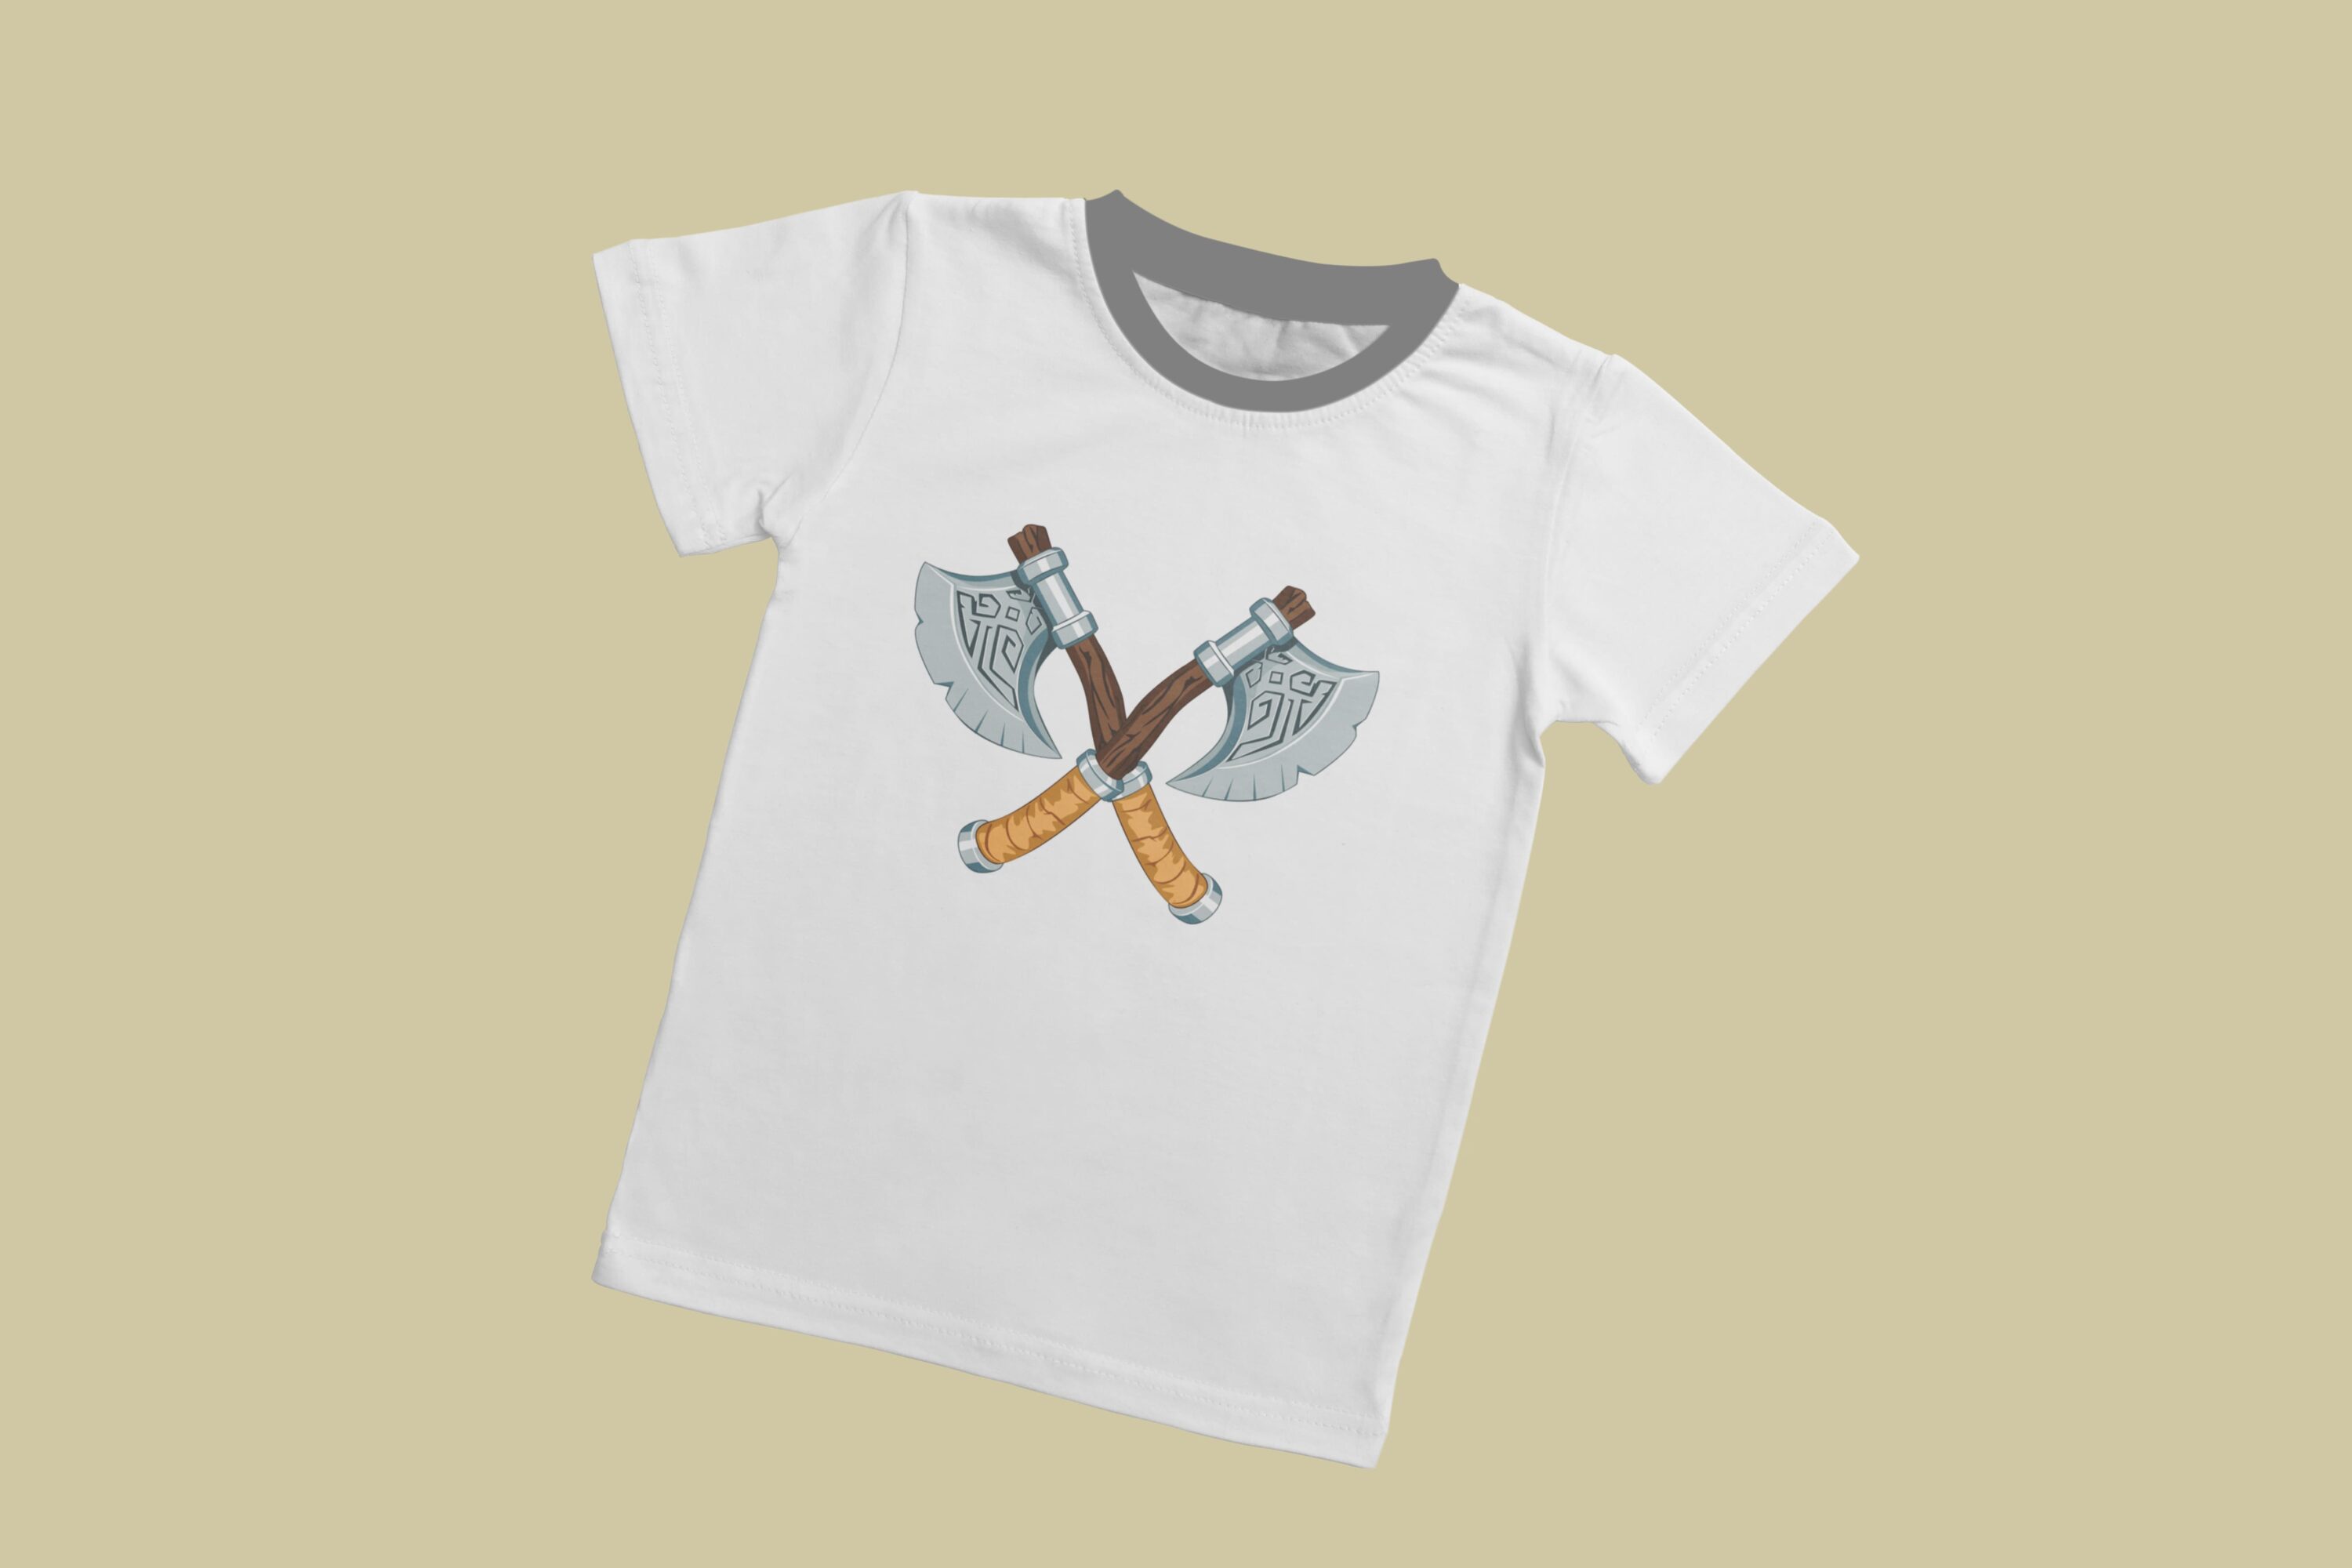 Two viking axes on the white t-shirt.